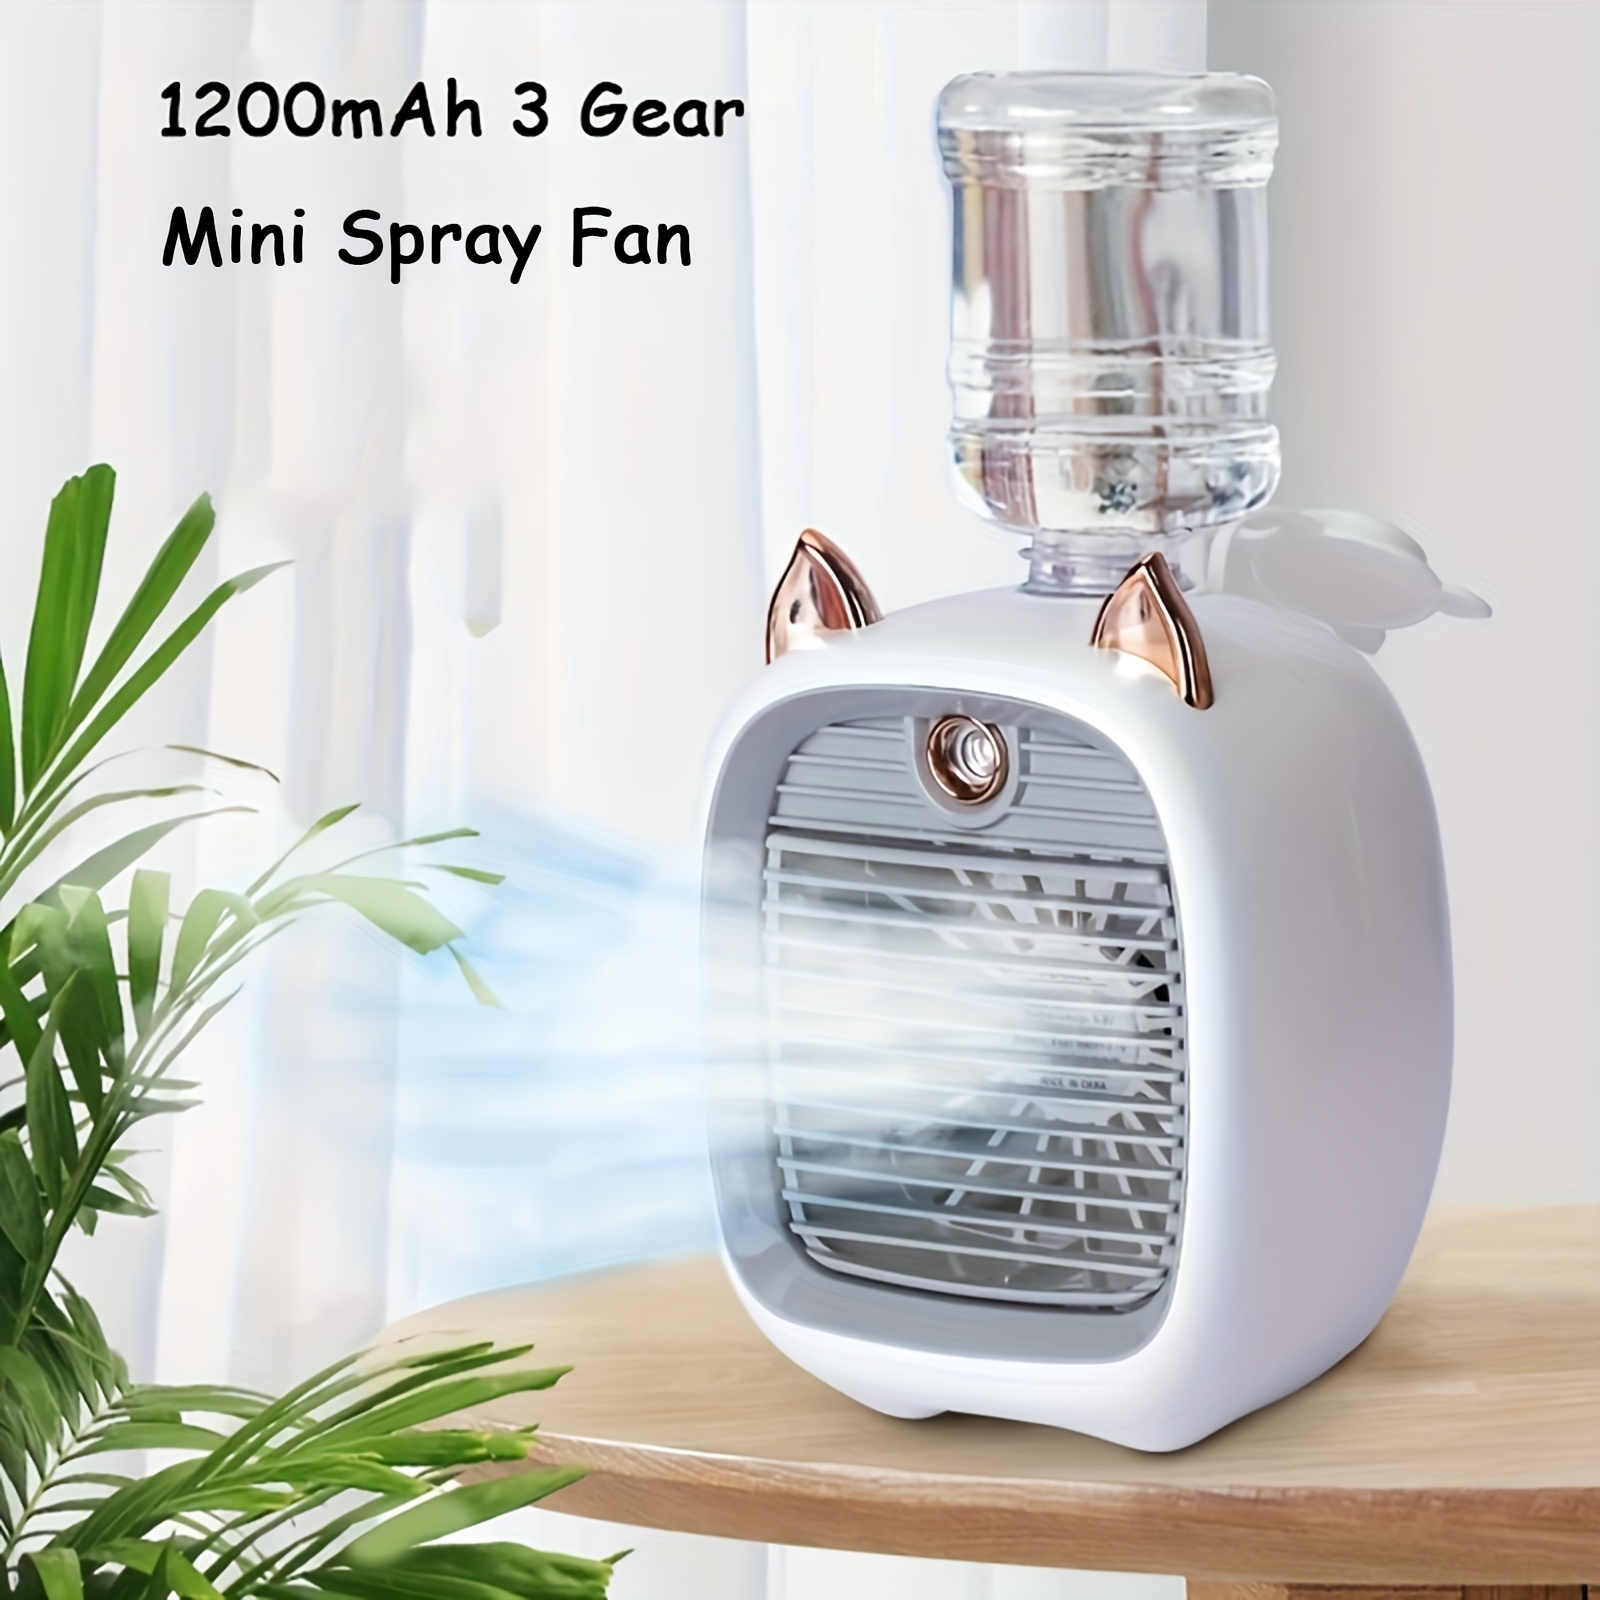 

Portable Mini Air Conditioner Fan Electric Fan Desk Misting 1200mah 3 Gear Air Conditioner Water Cooling Fan Usb Type-c Charging Spray Humidifier Fan Home Birthday Gifts Christmas Gifts